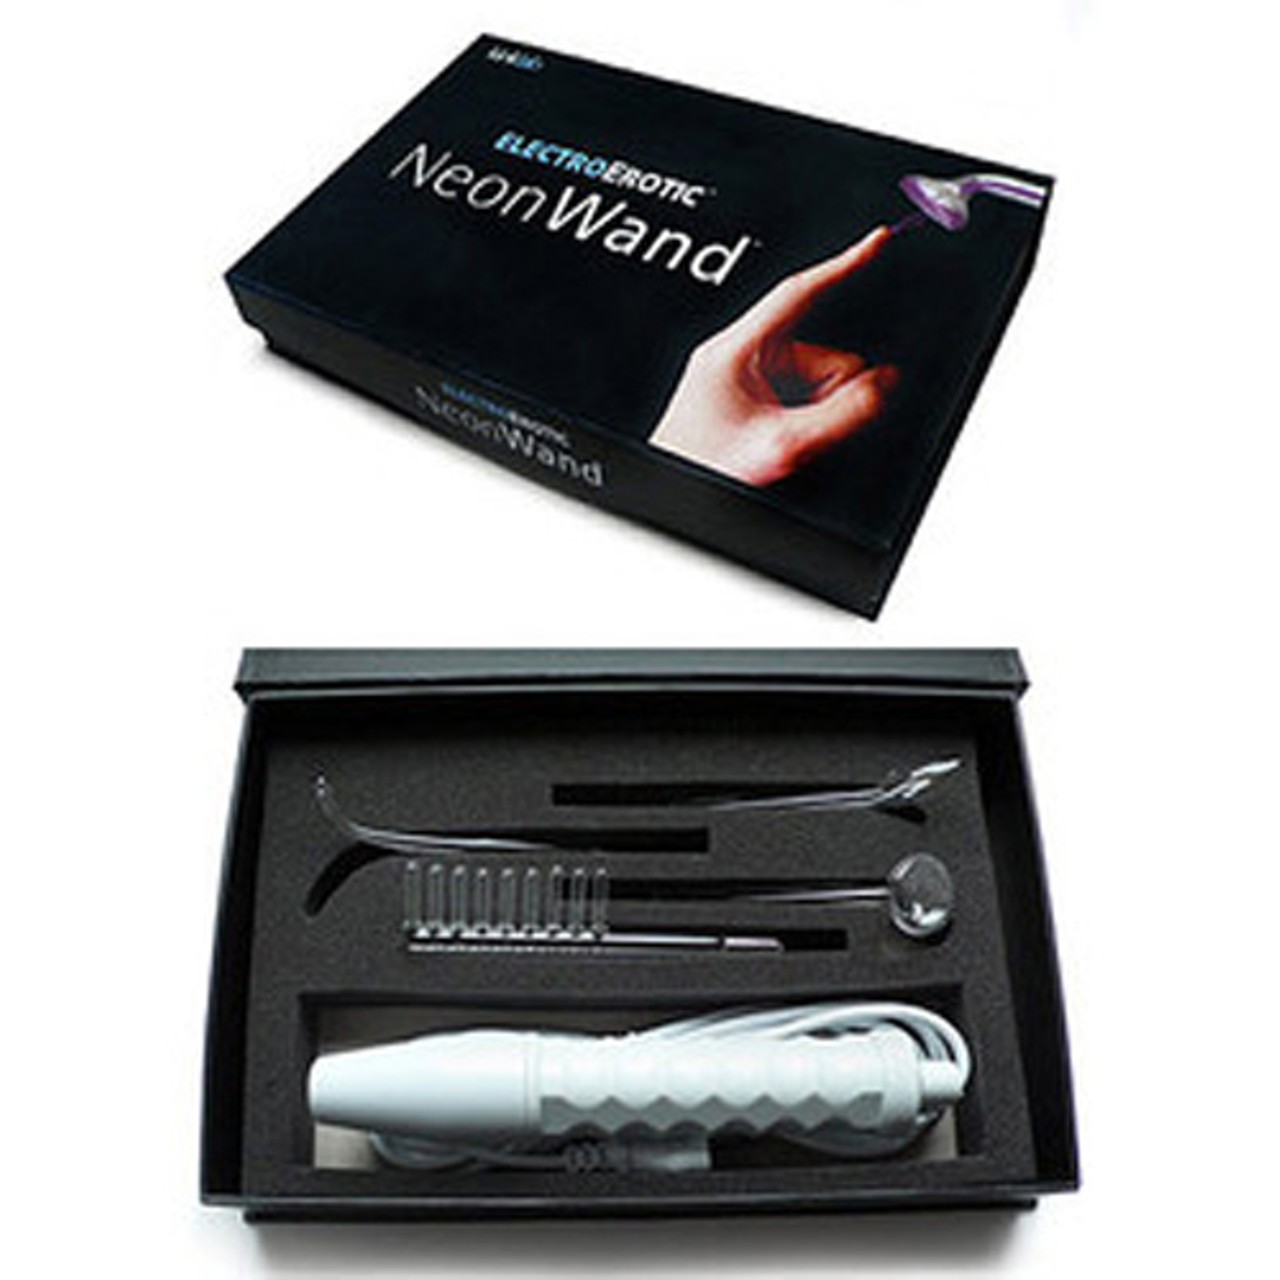 ELECTRO PLAY WAND BY KINKLAB ..........
A state-of-the art electro-stimulation device perfect for seasoned pros as well as new users. Get one for Grandma this Christmas.